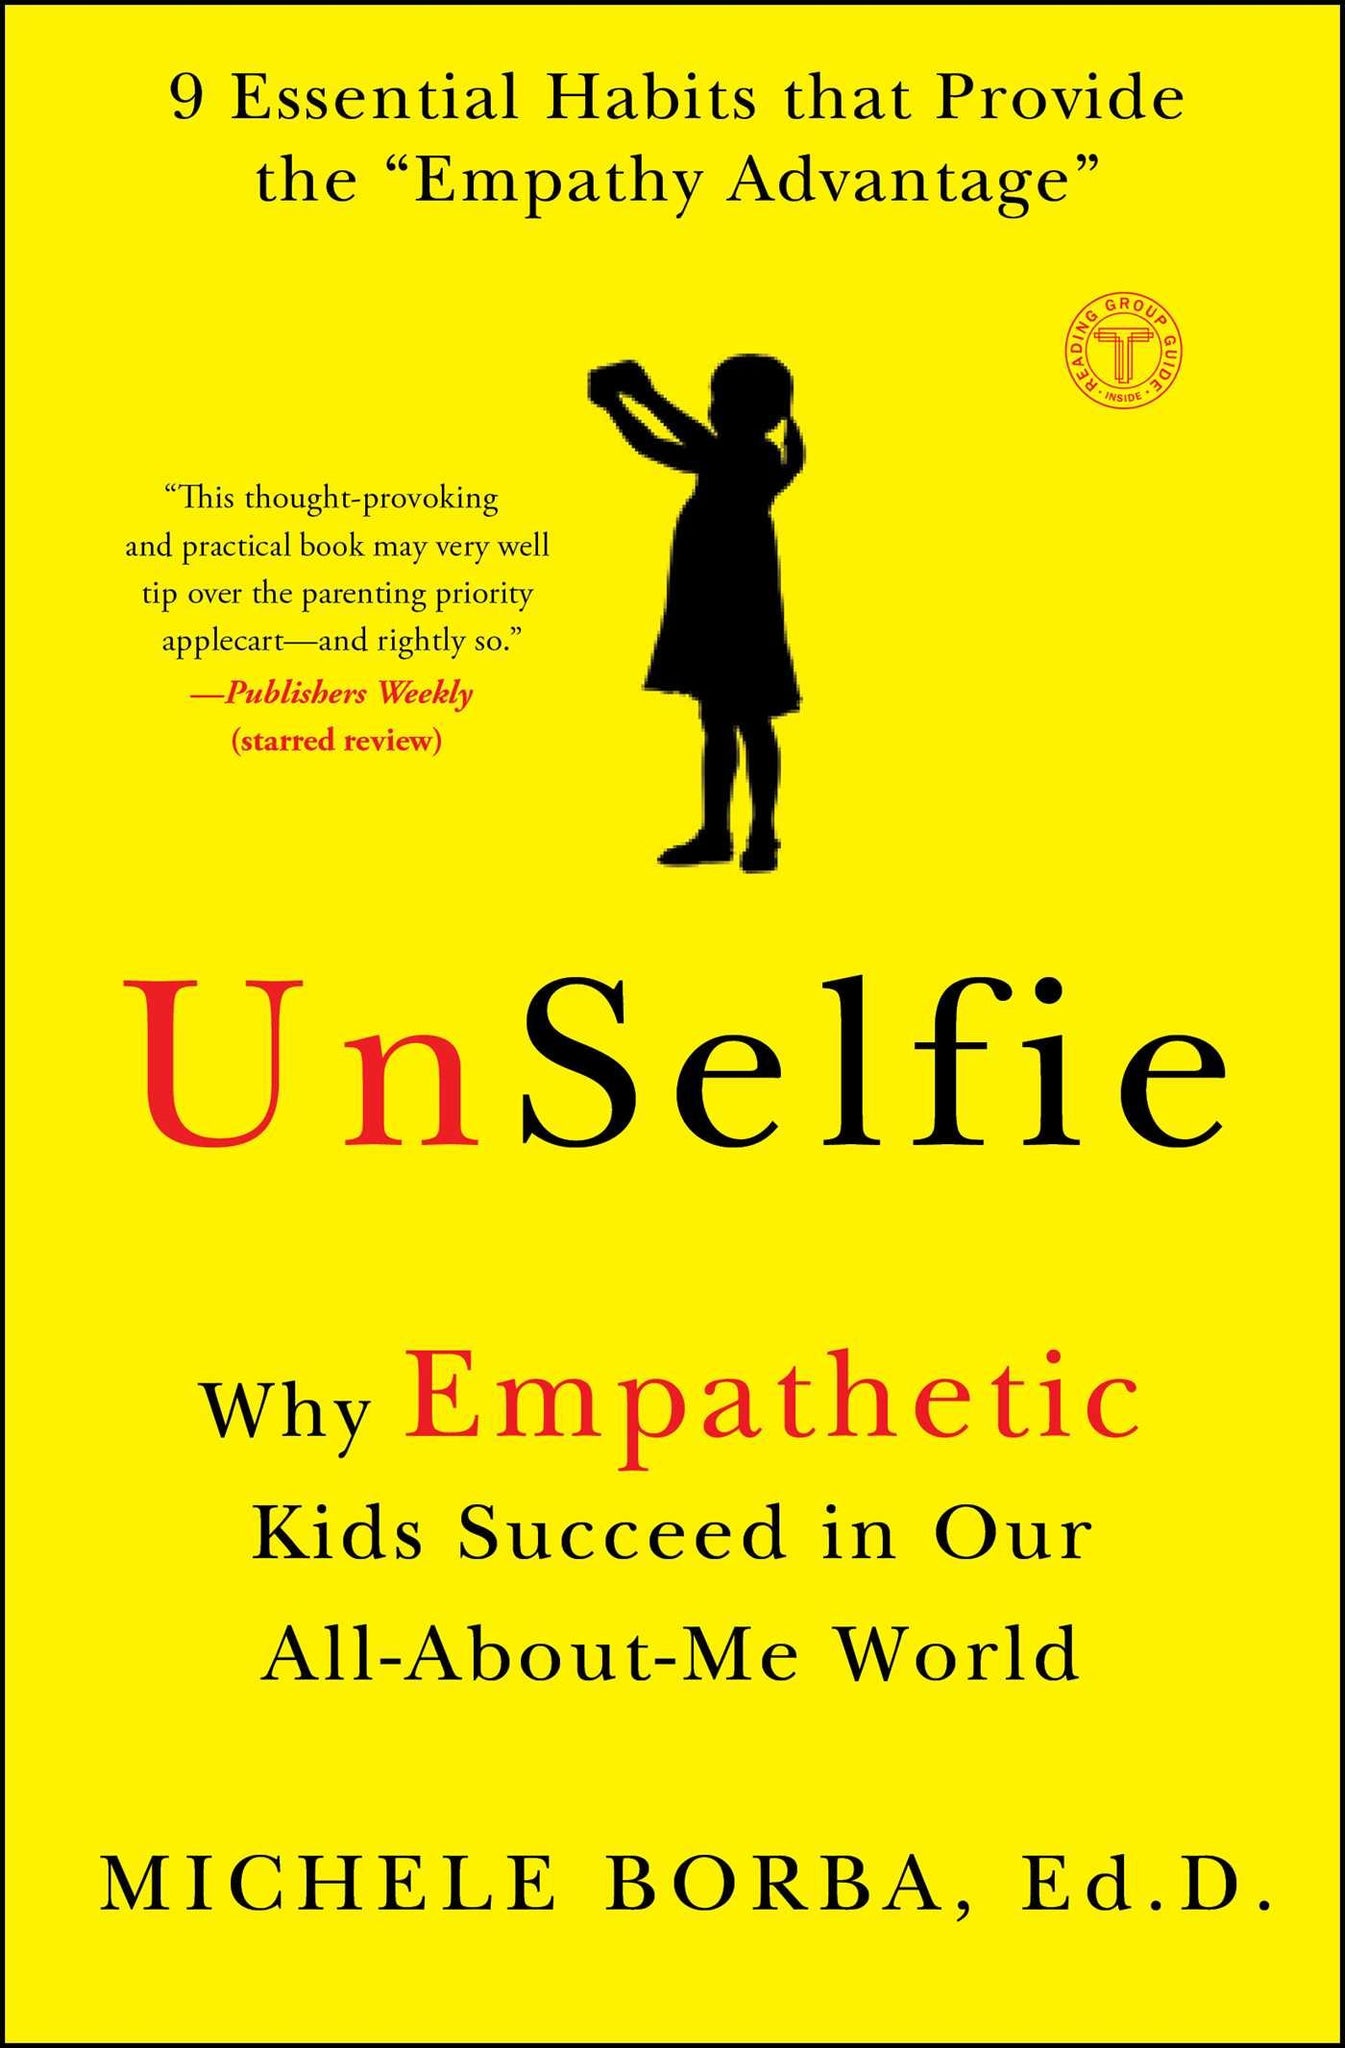 UnSelfie: Why Empathetic Kids Succeed in Our All-About-Me World - Paperback